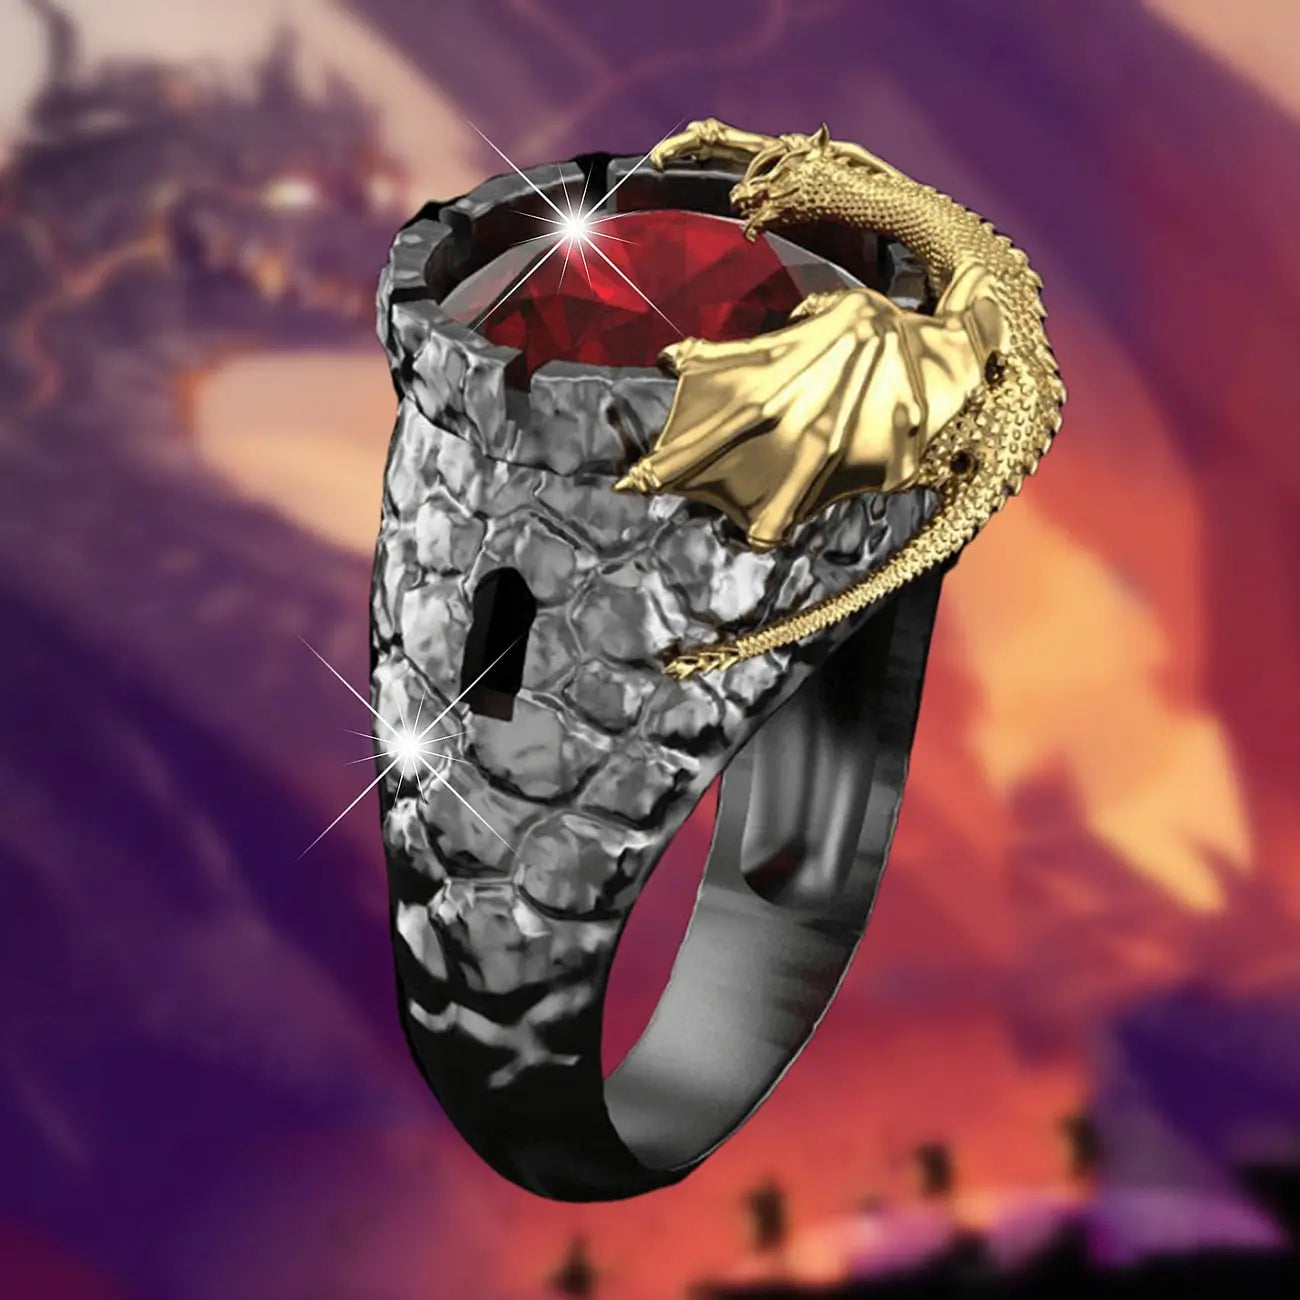 Lava Pool Dragon Ring - Large Black Dragon Ring With Red Crystal